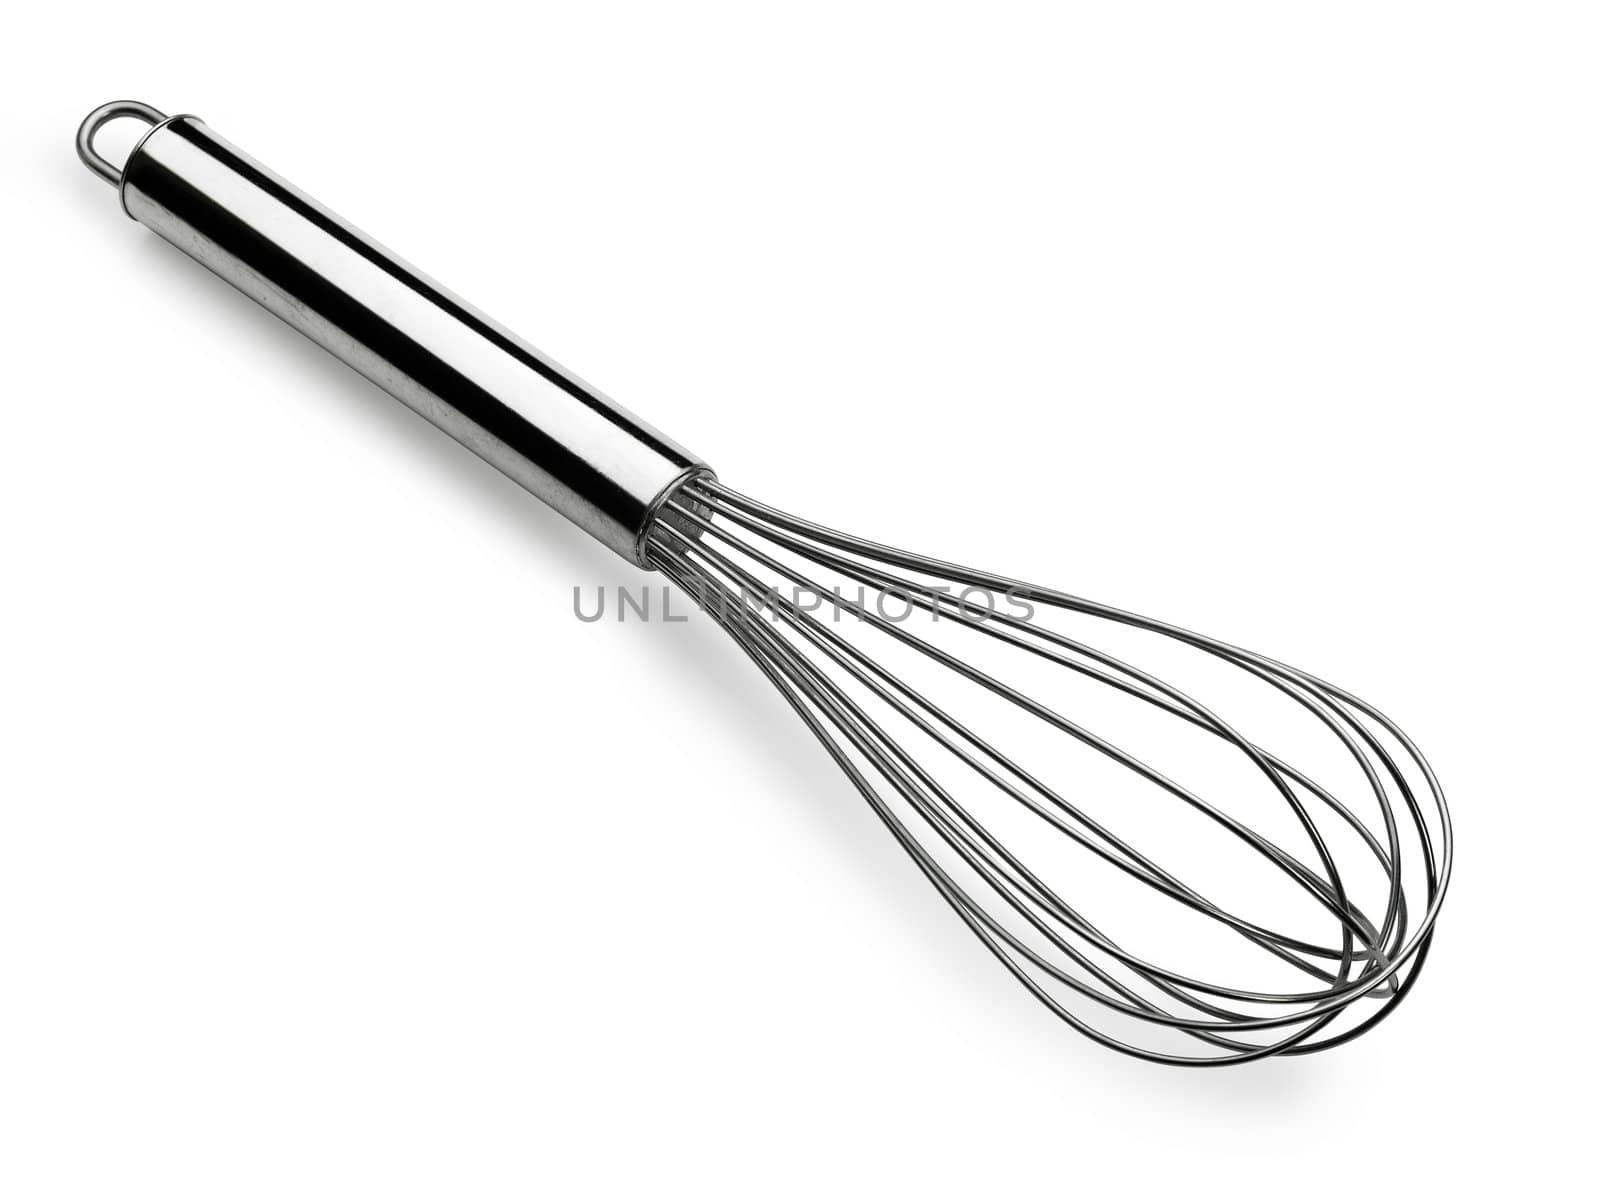 Stainless steel whisk i(CLIPPING PATH) by pbombaert